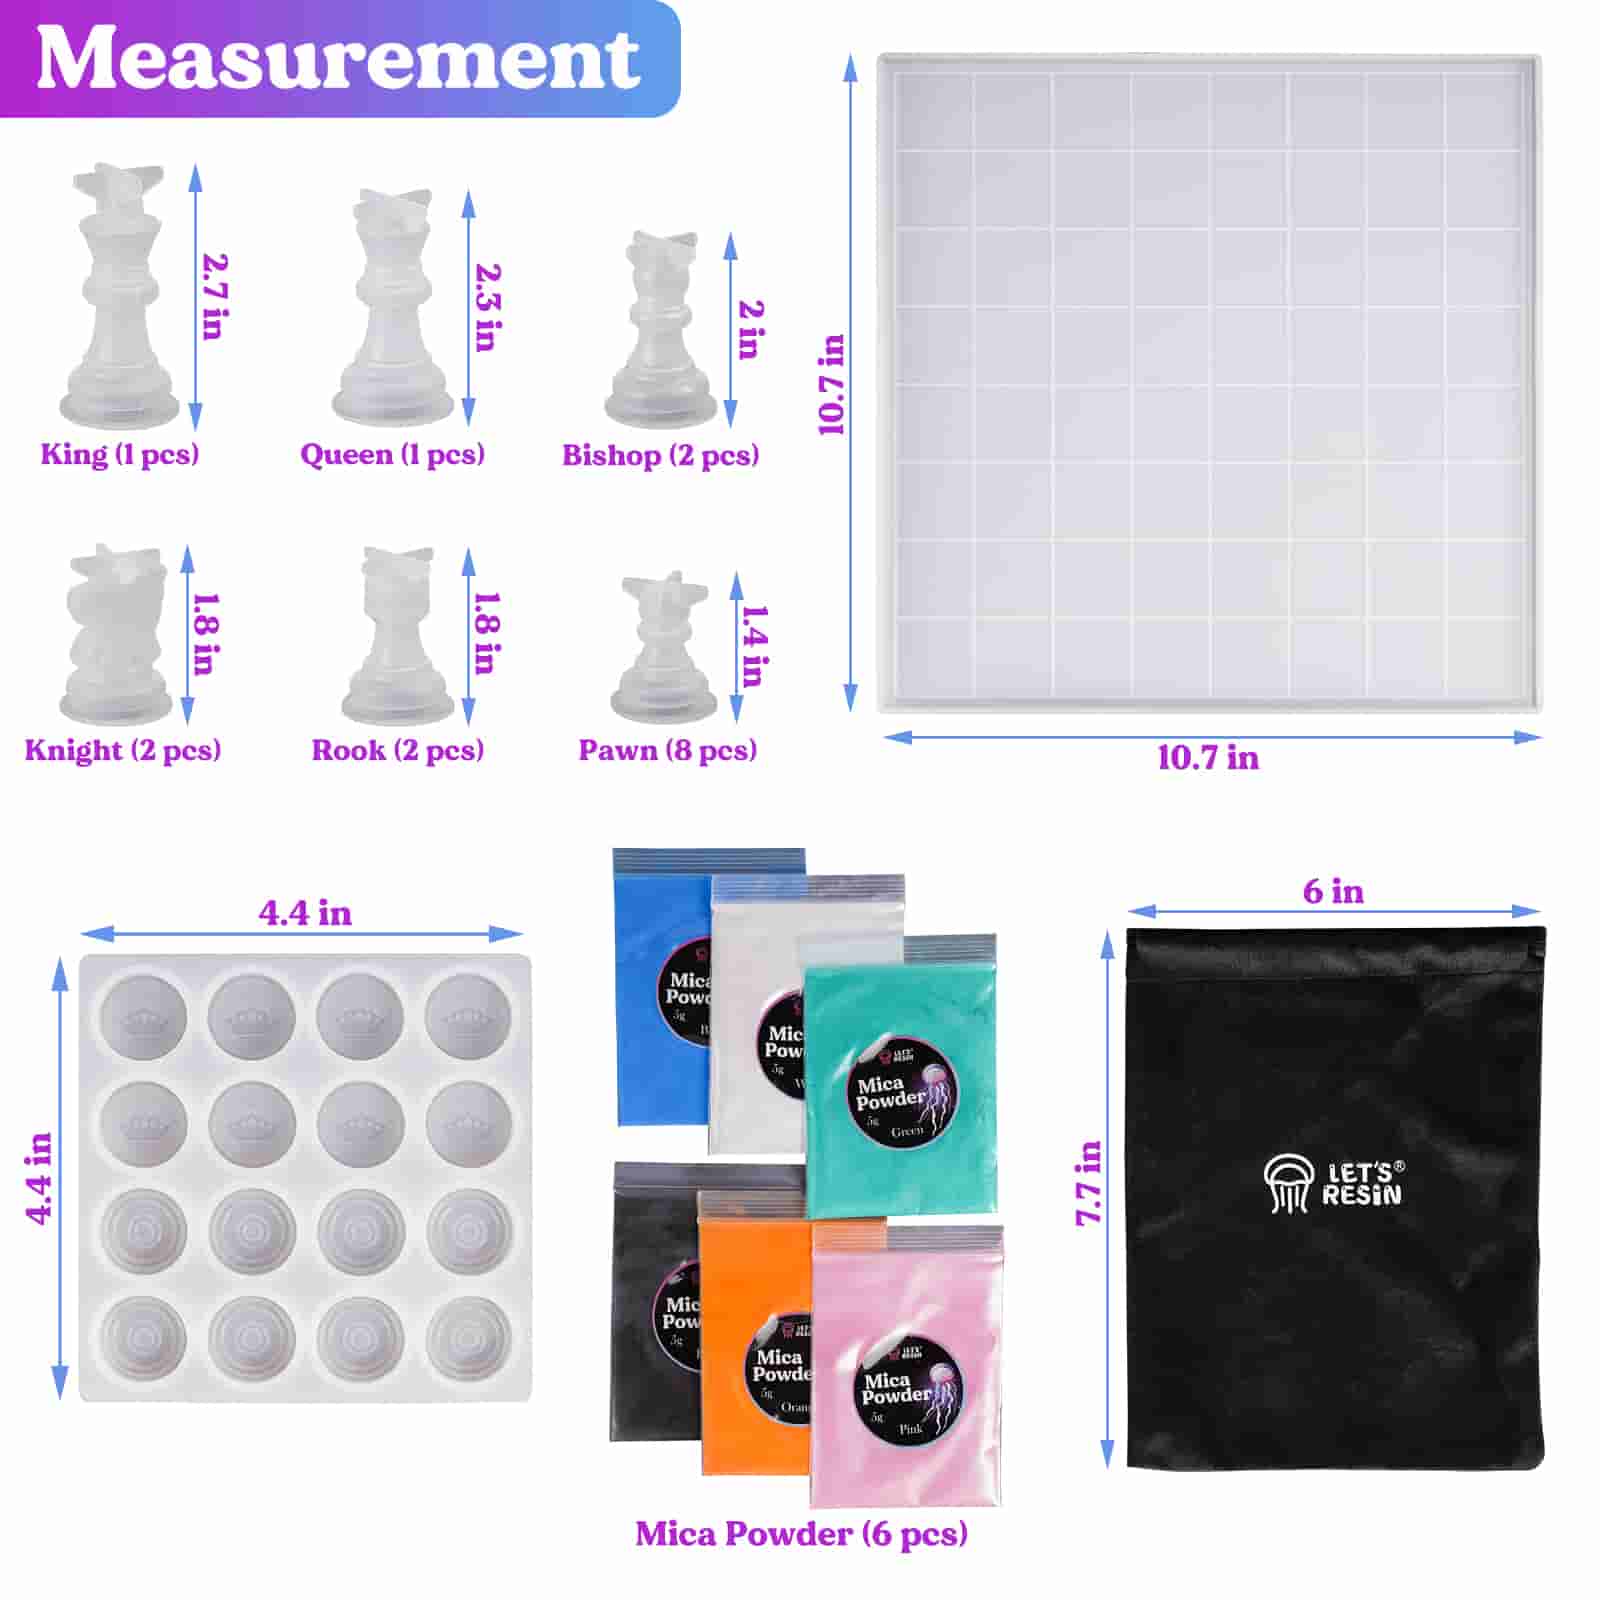 Chess Set Resin Mold for Making 13 Detachable Puzzle ChessBoard – IntoResin